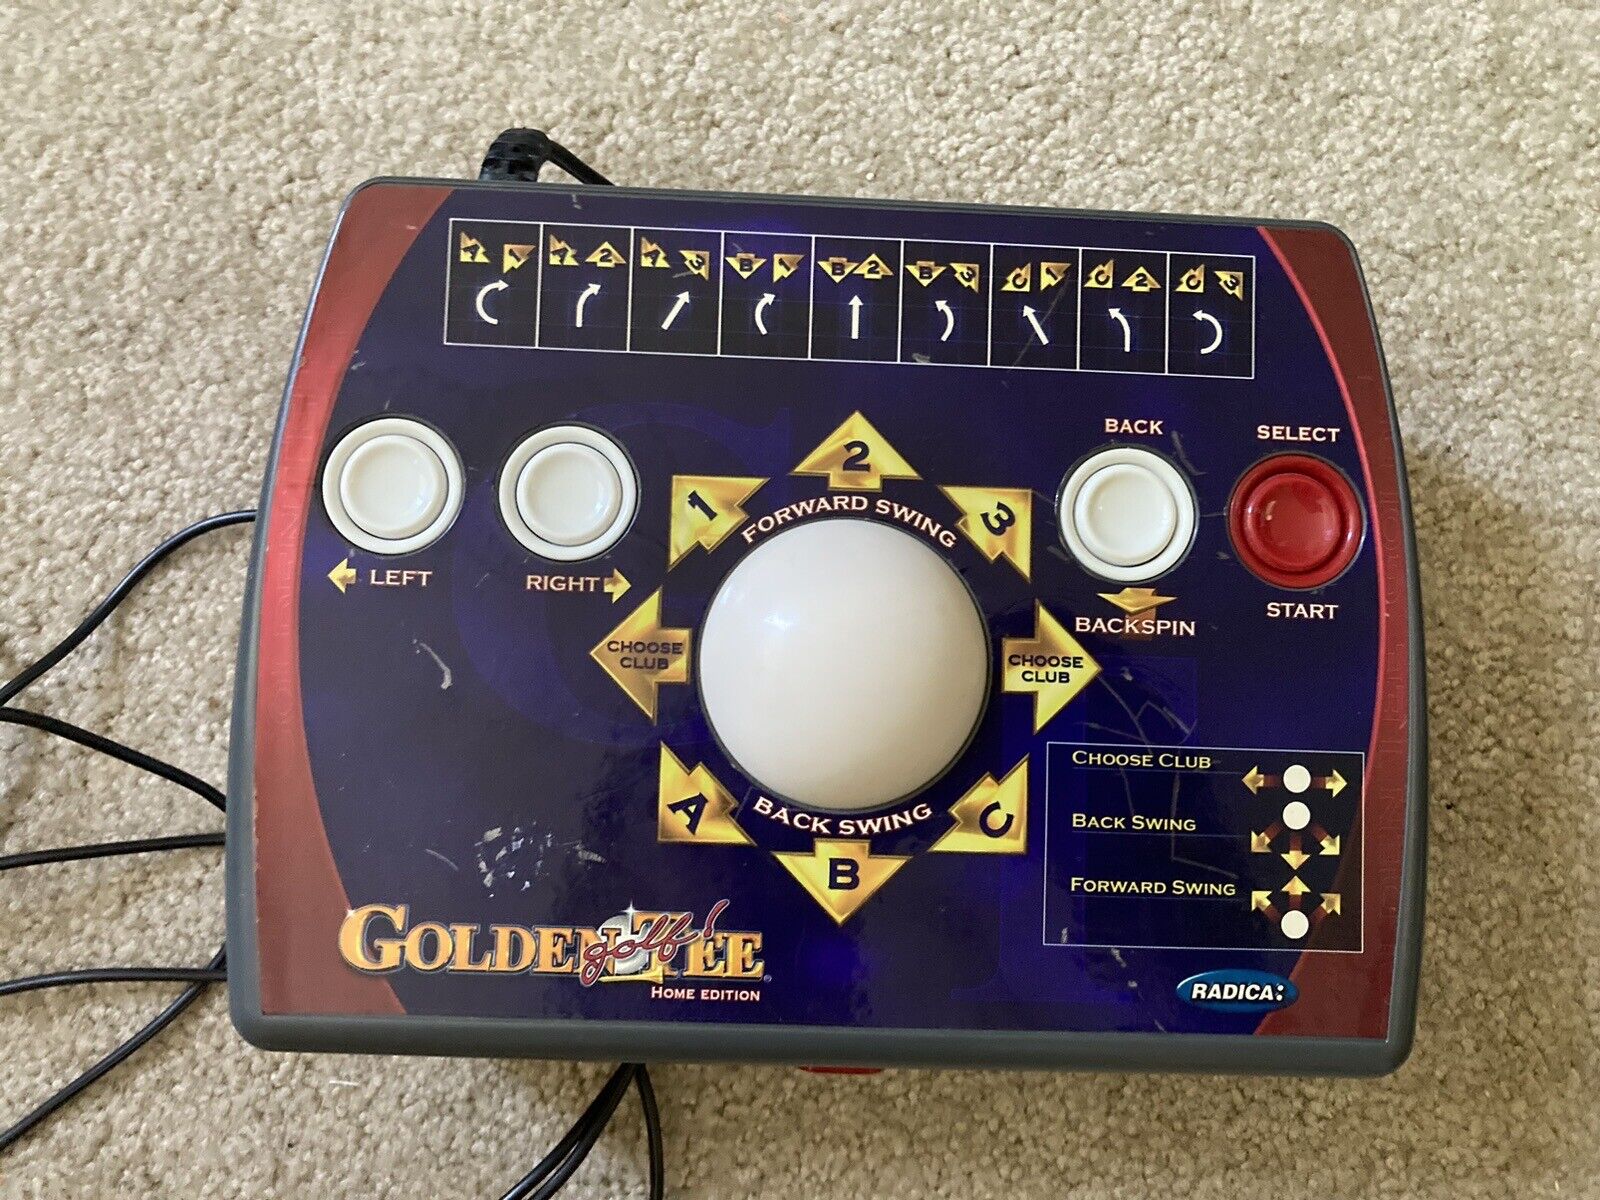 Radica GOLDEN TEE Golf Home Edition Plug and Play TV Video Arcade Game TESTED